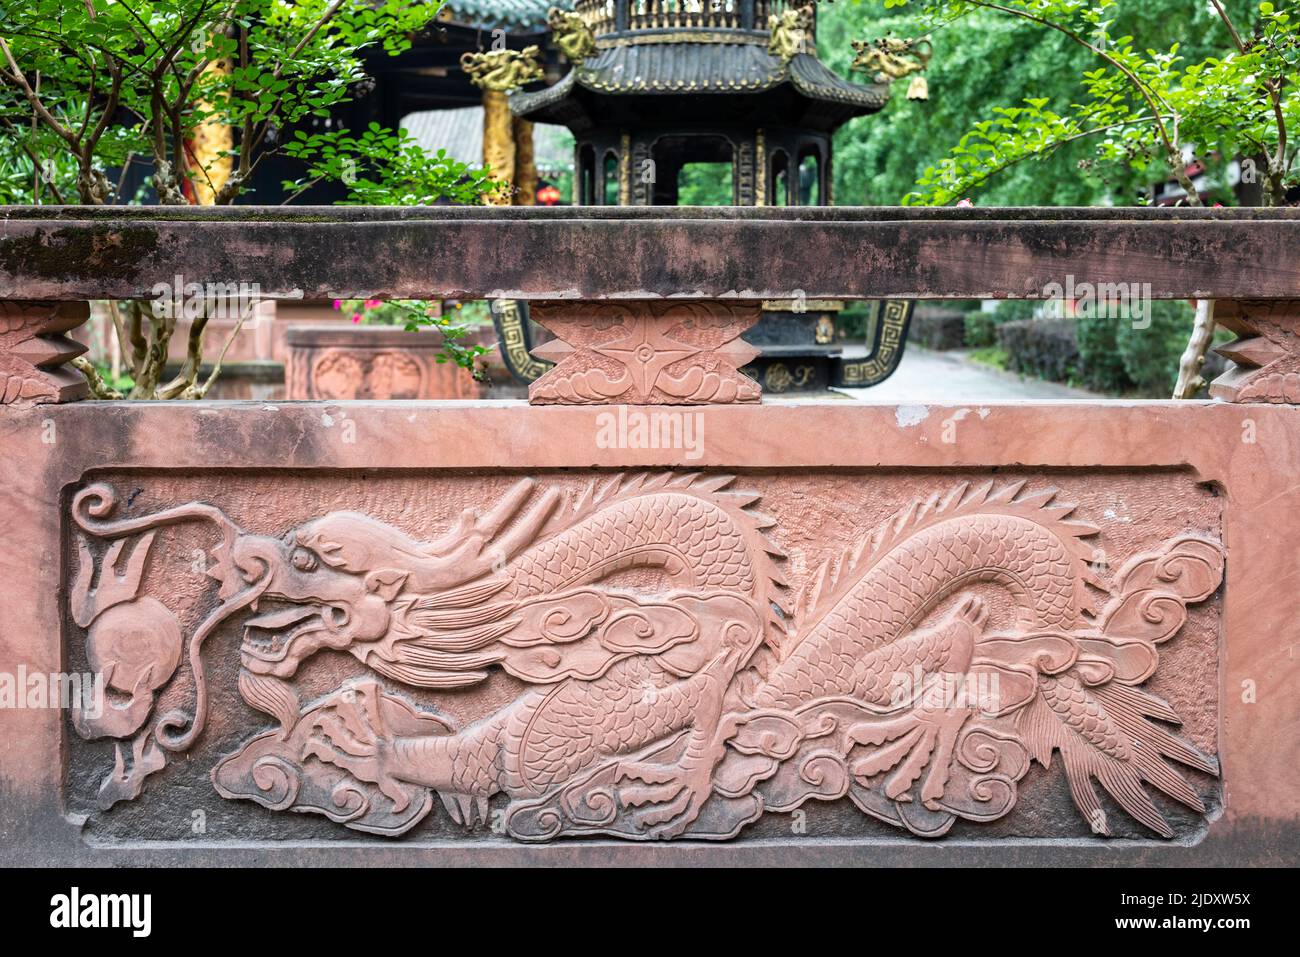 Bas-relief of a dragon on a wall in a taoist temple Stock Photo